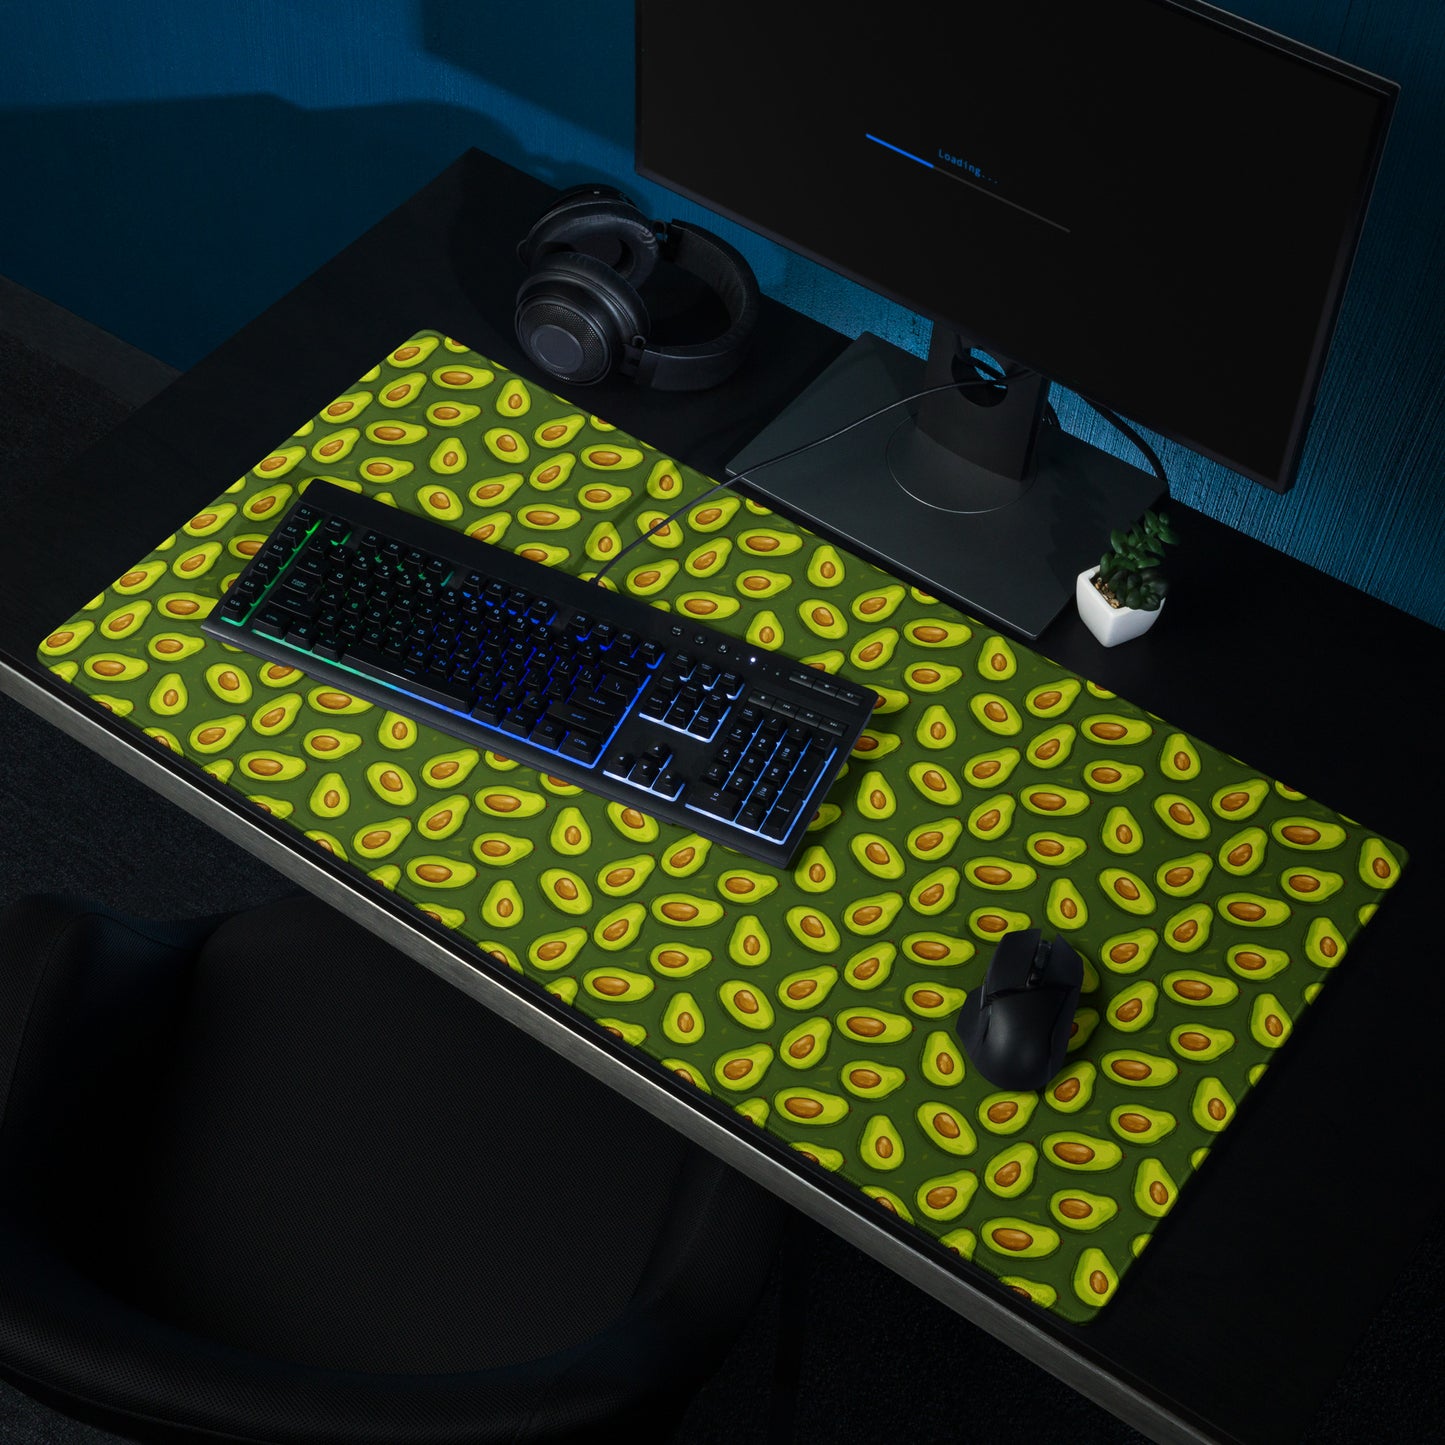 A 36" x 18" desk pad with lots of avocados on it shown on a desk setup. Green in color.